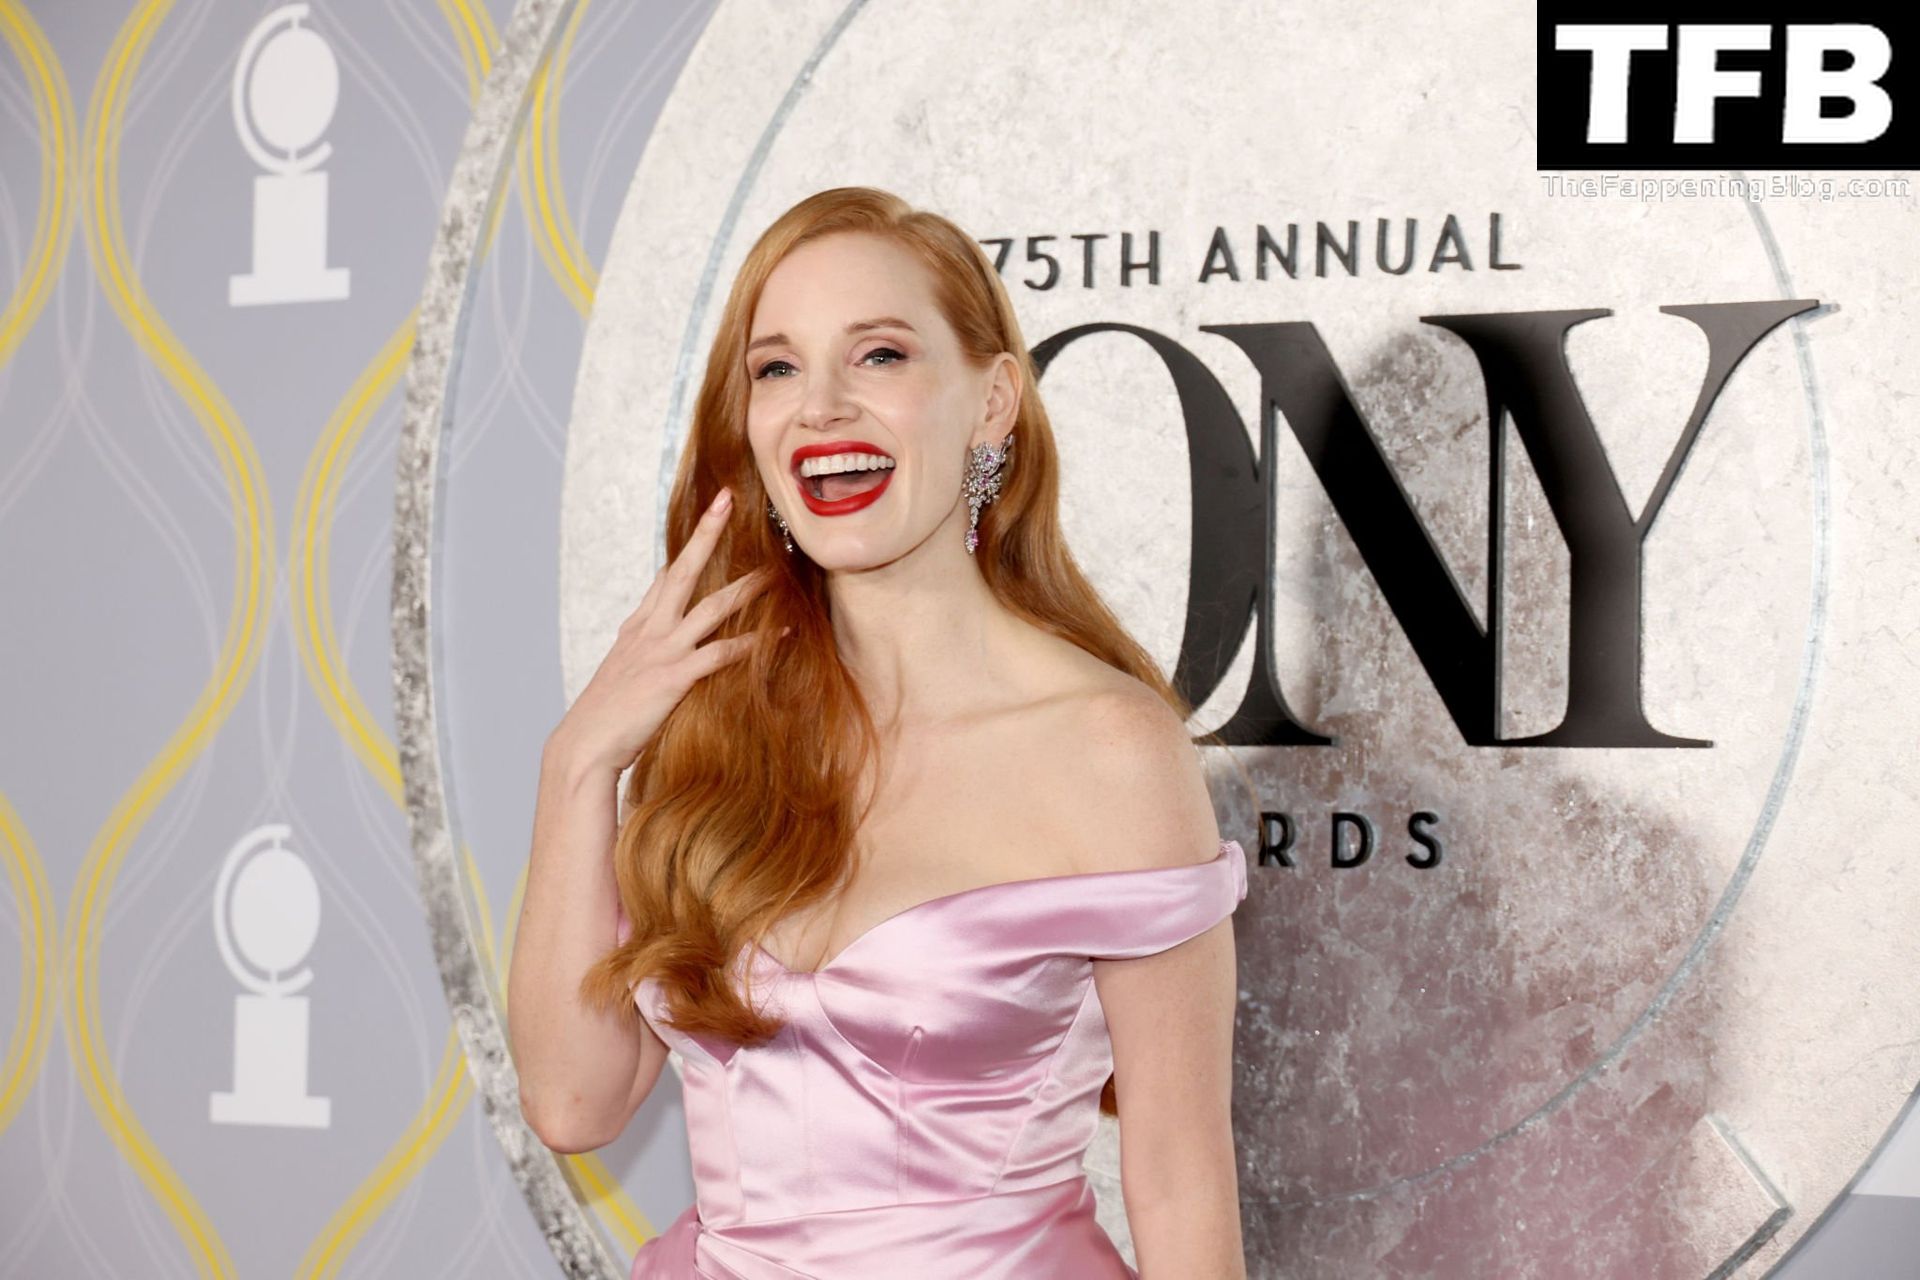 Jessica-Chastain-Sexy-The-Fappening-Blog-16.jpg